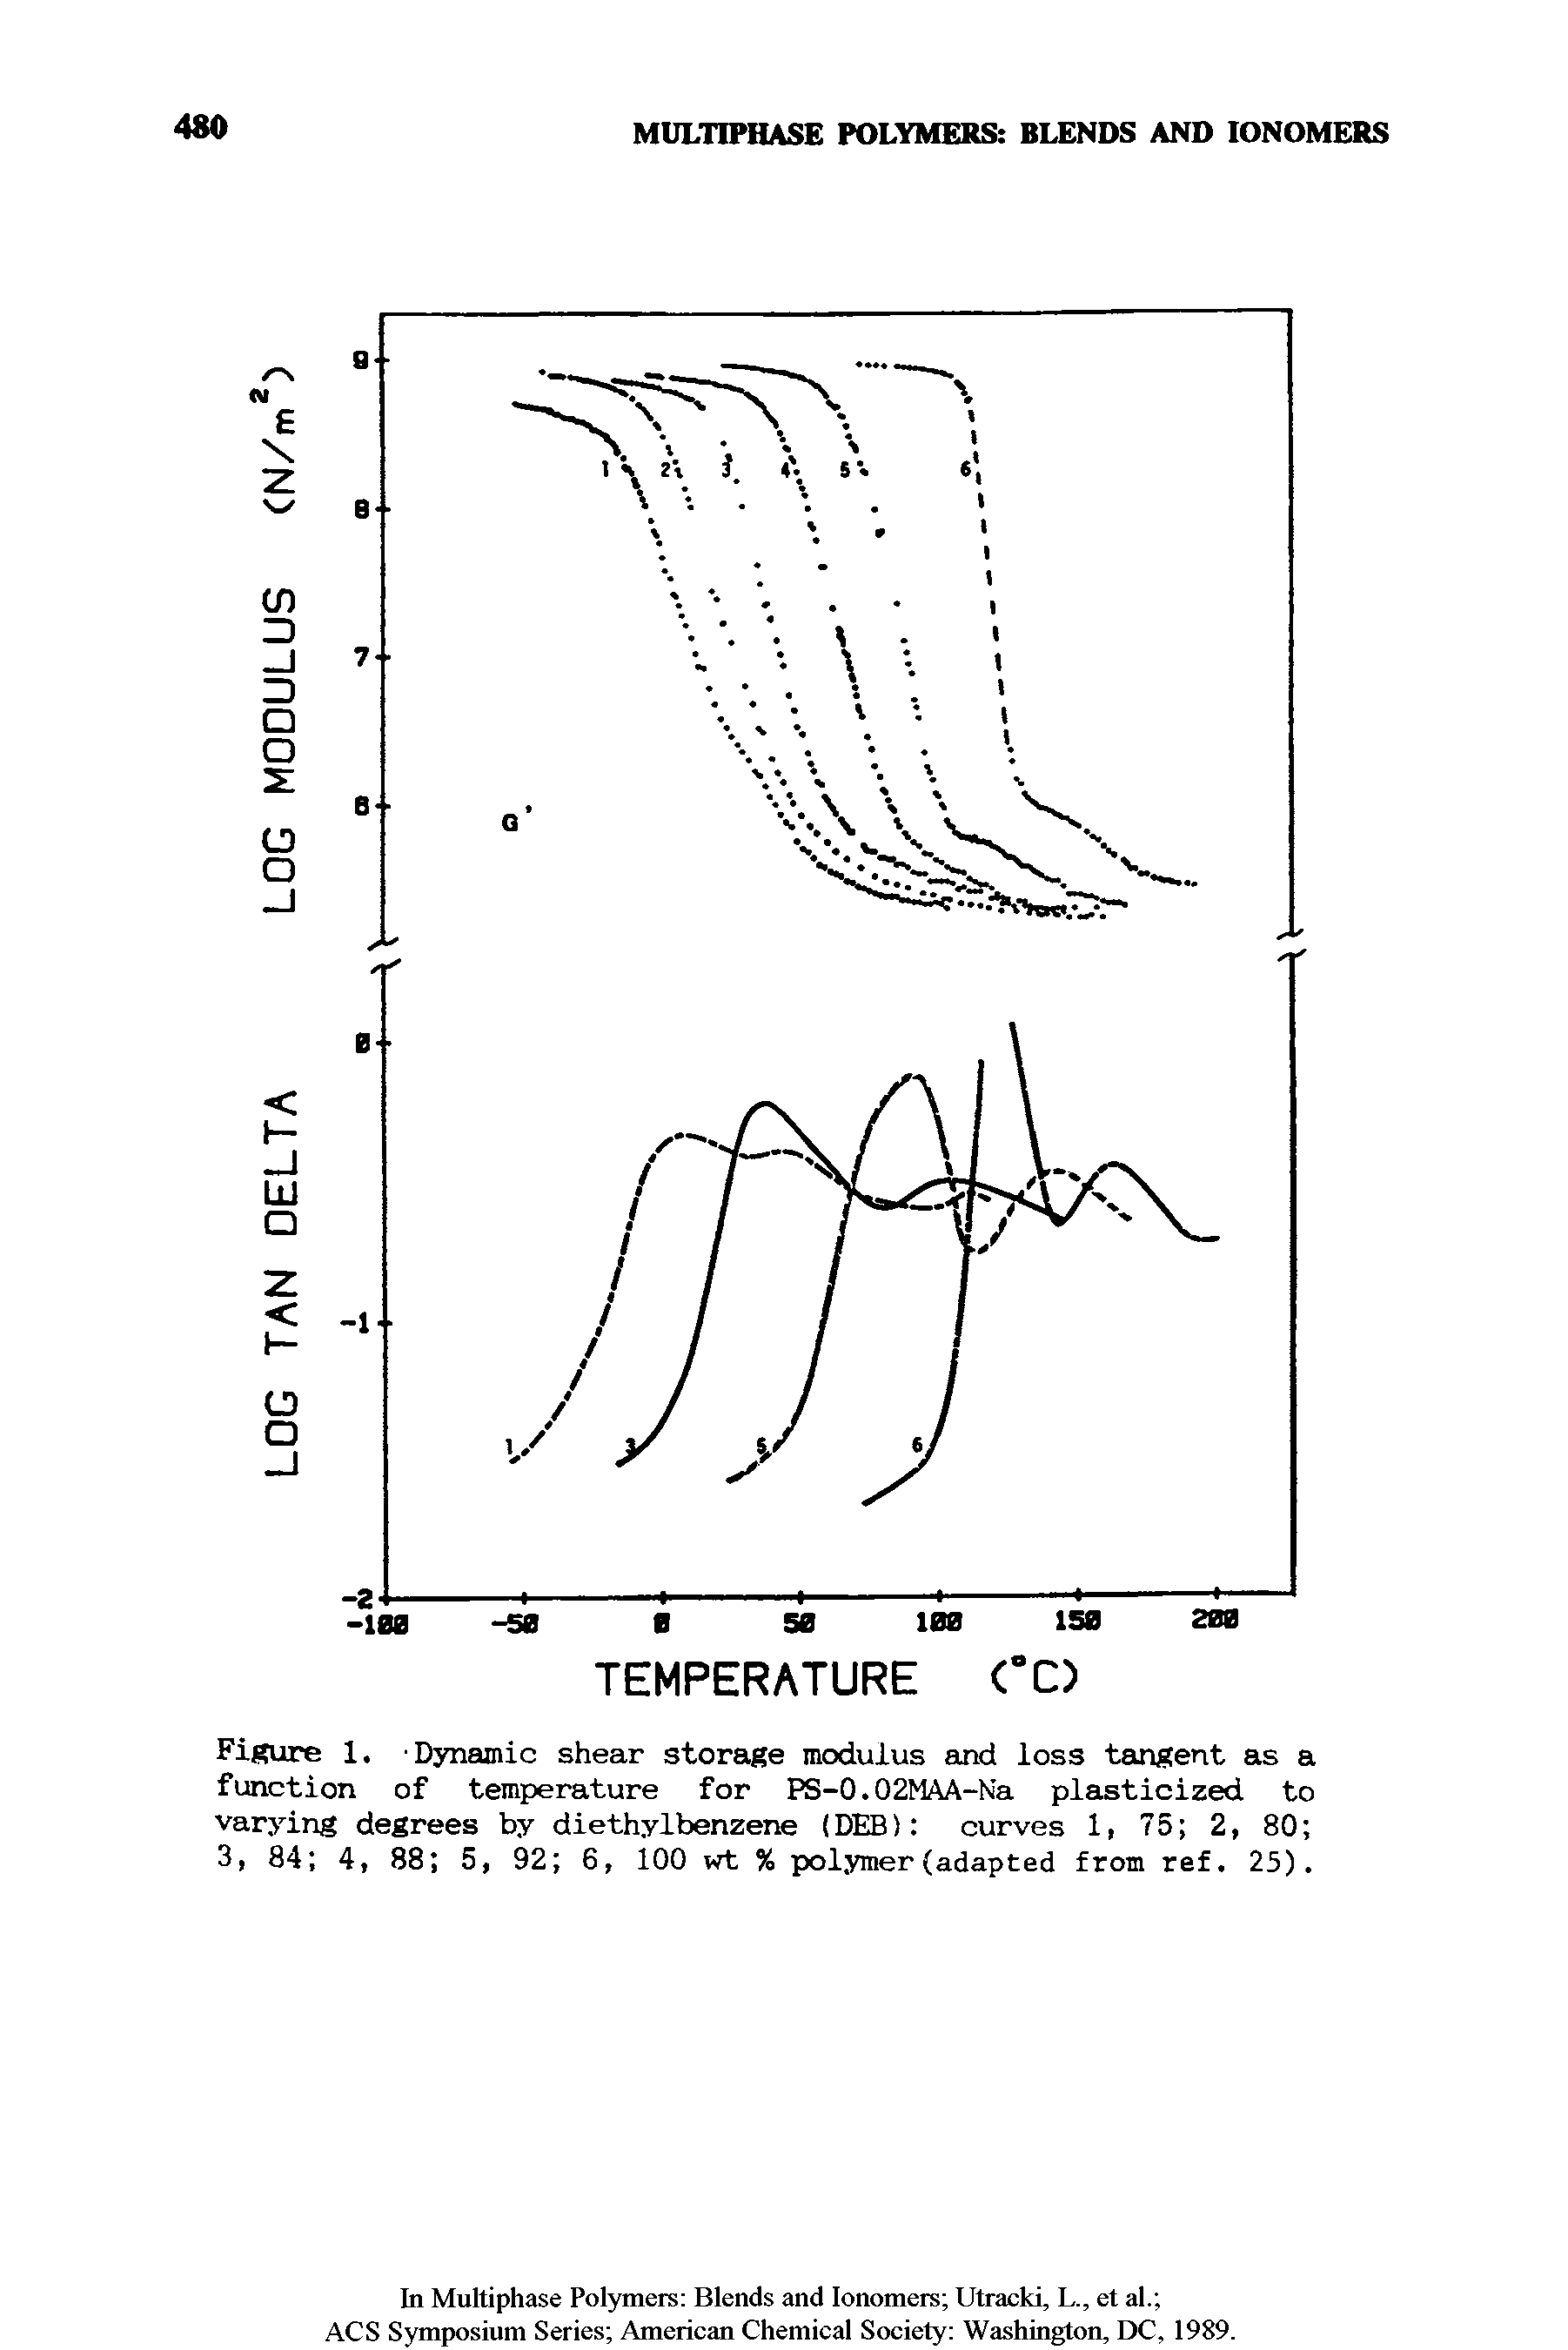 Figure 1. Dynamic shear storage modulus and loss tangent as a function of temperature for PS-0.02MAA-Na plasticized to varying degrees by diethylbenzene (DEB) curves 1, "5 2, 80 3, 84 4, 88 5, 92 6, 100 wt % polymer(adapted from ref. 25).